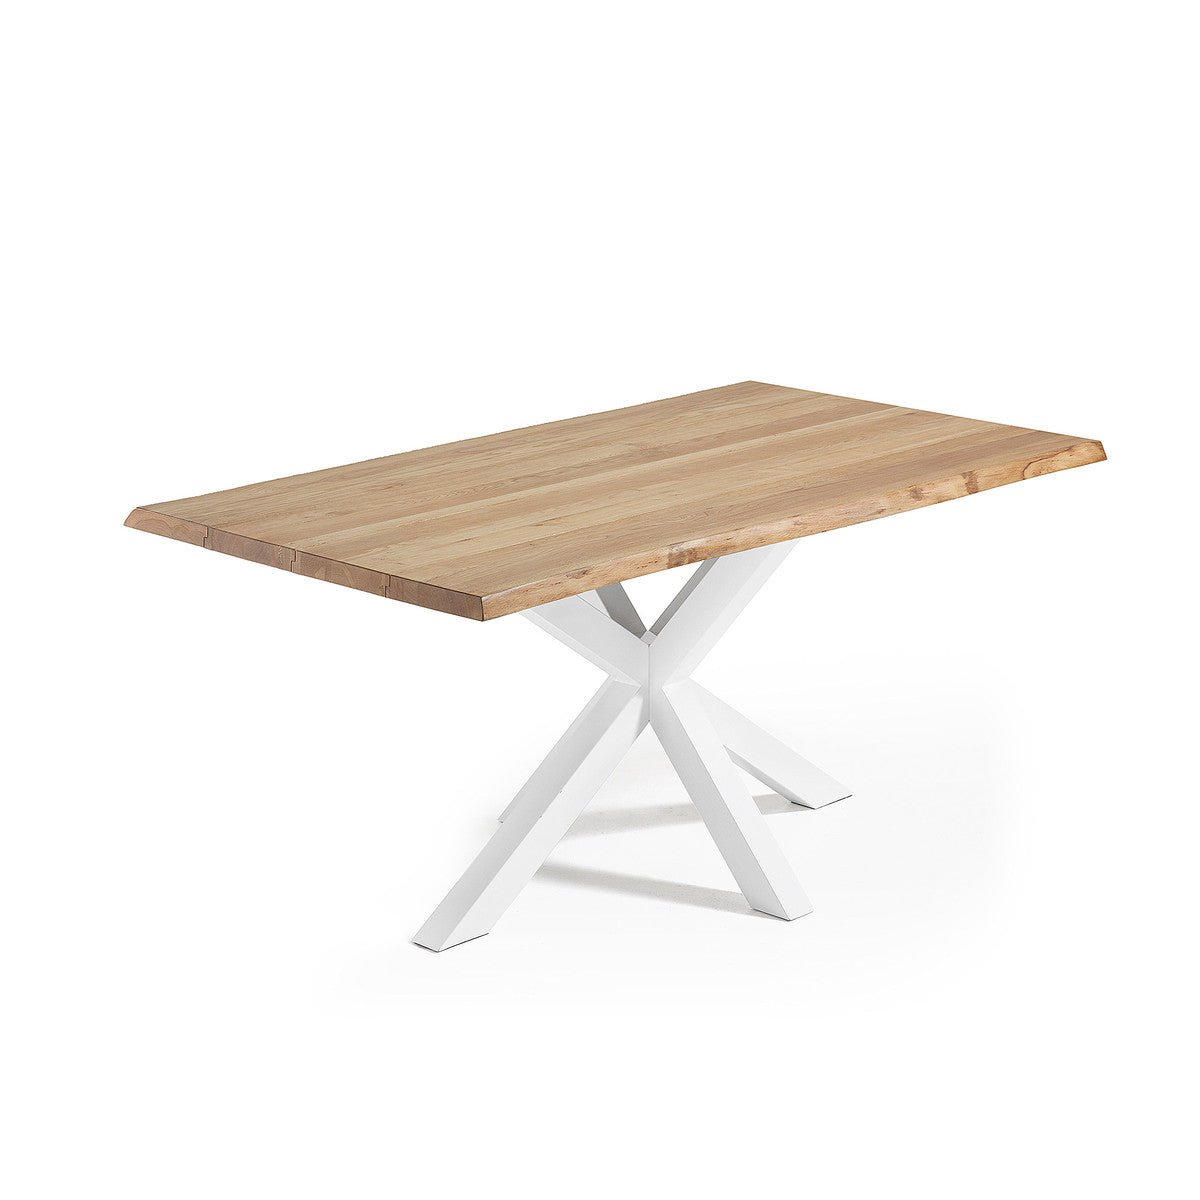 Diego 1.8m Natural Oak Dining Table - White - Dining Tables